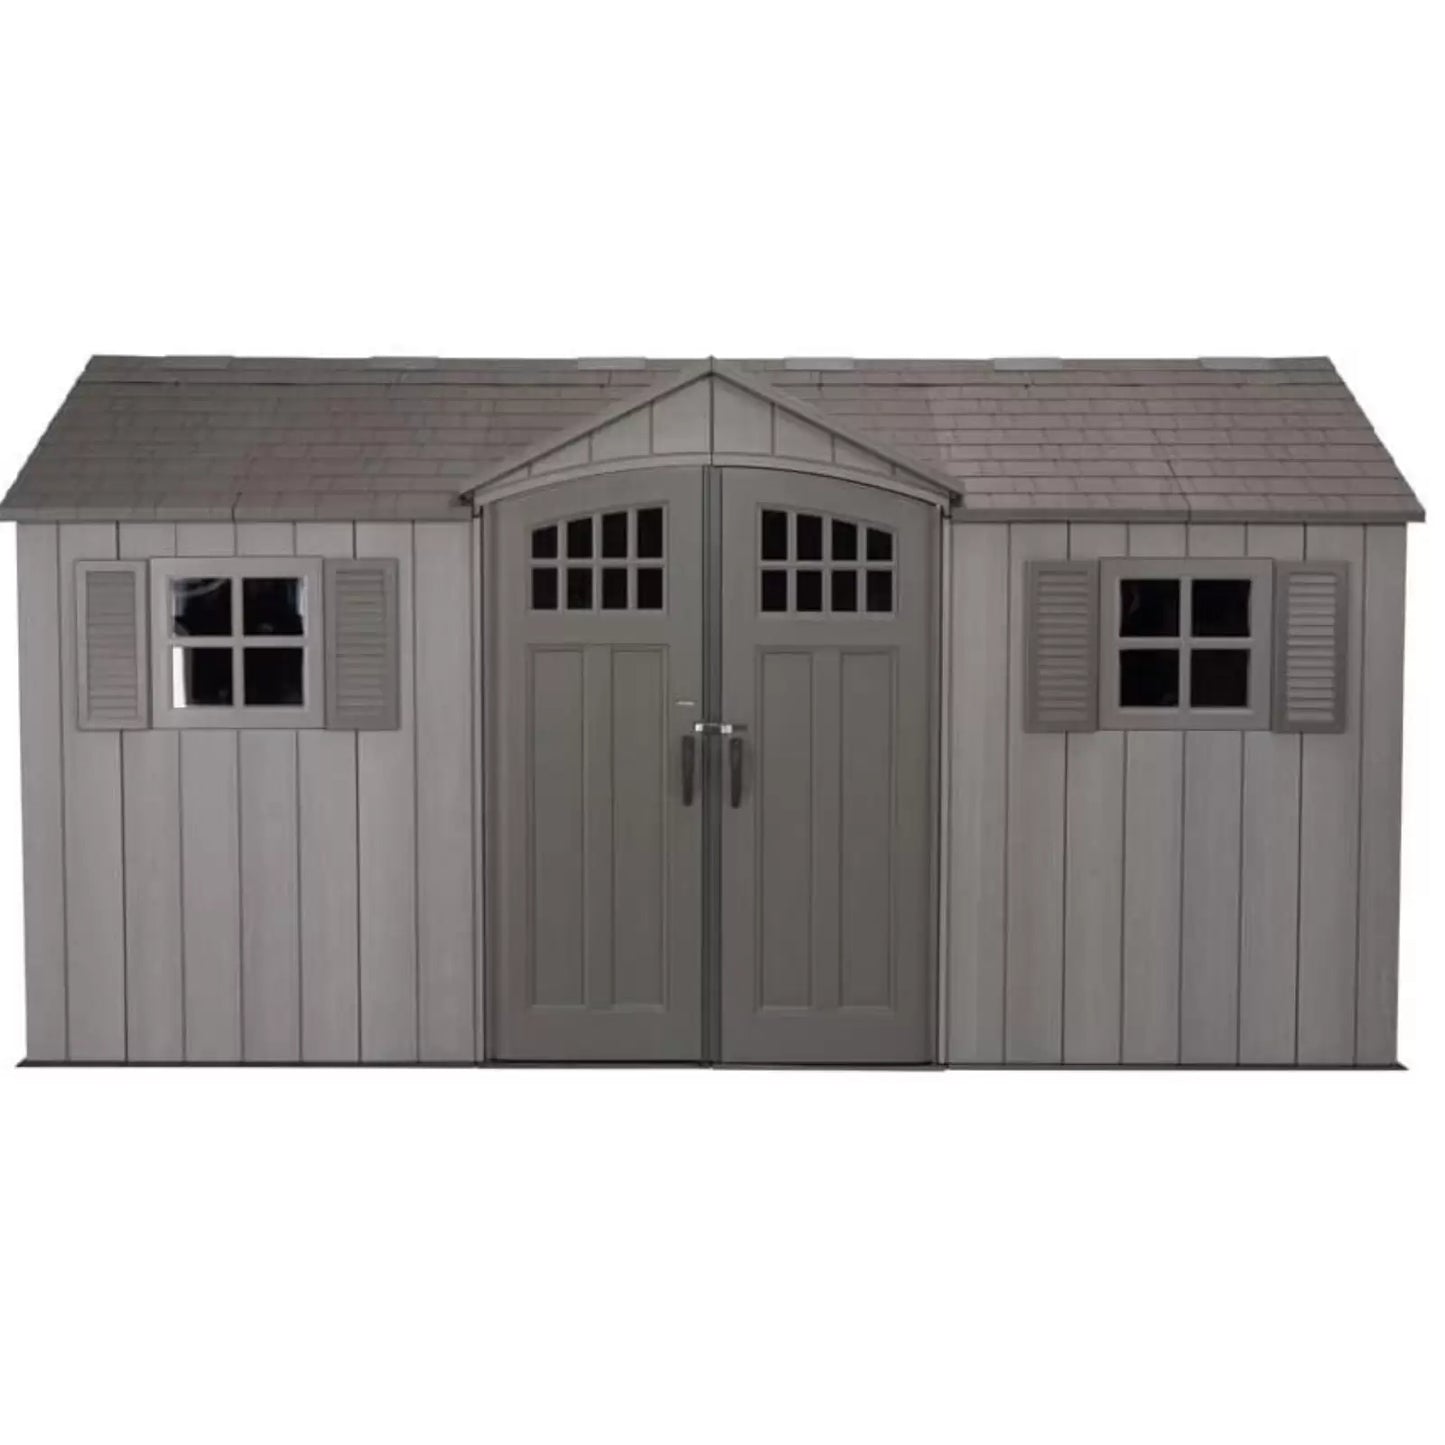 Lifetime Outdoor Storage Plastic Garden Shed (Size: 8x15ft)